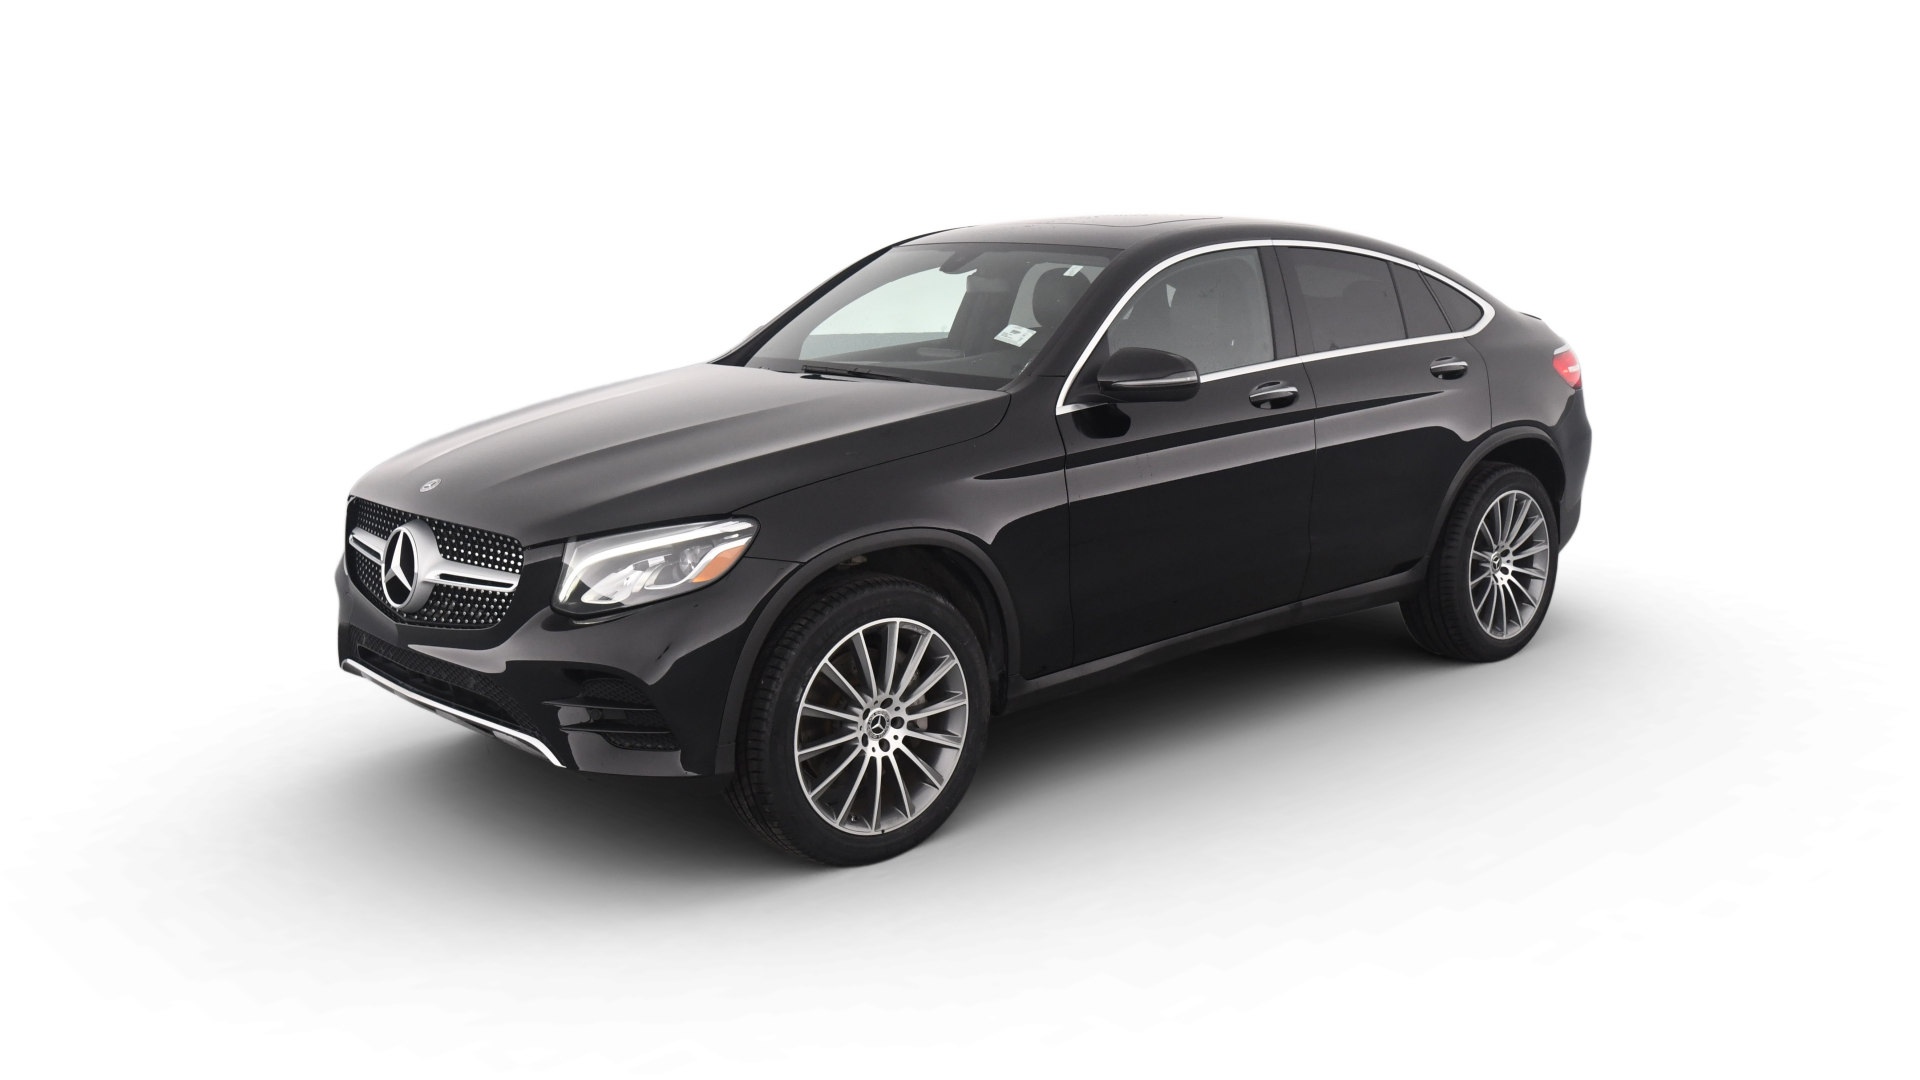 Mercedes-Benz GLC Coupe model image.